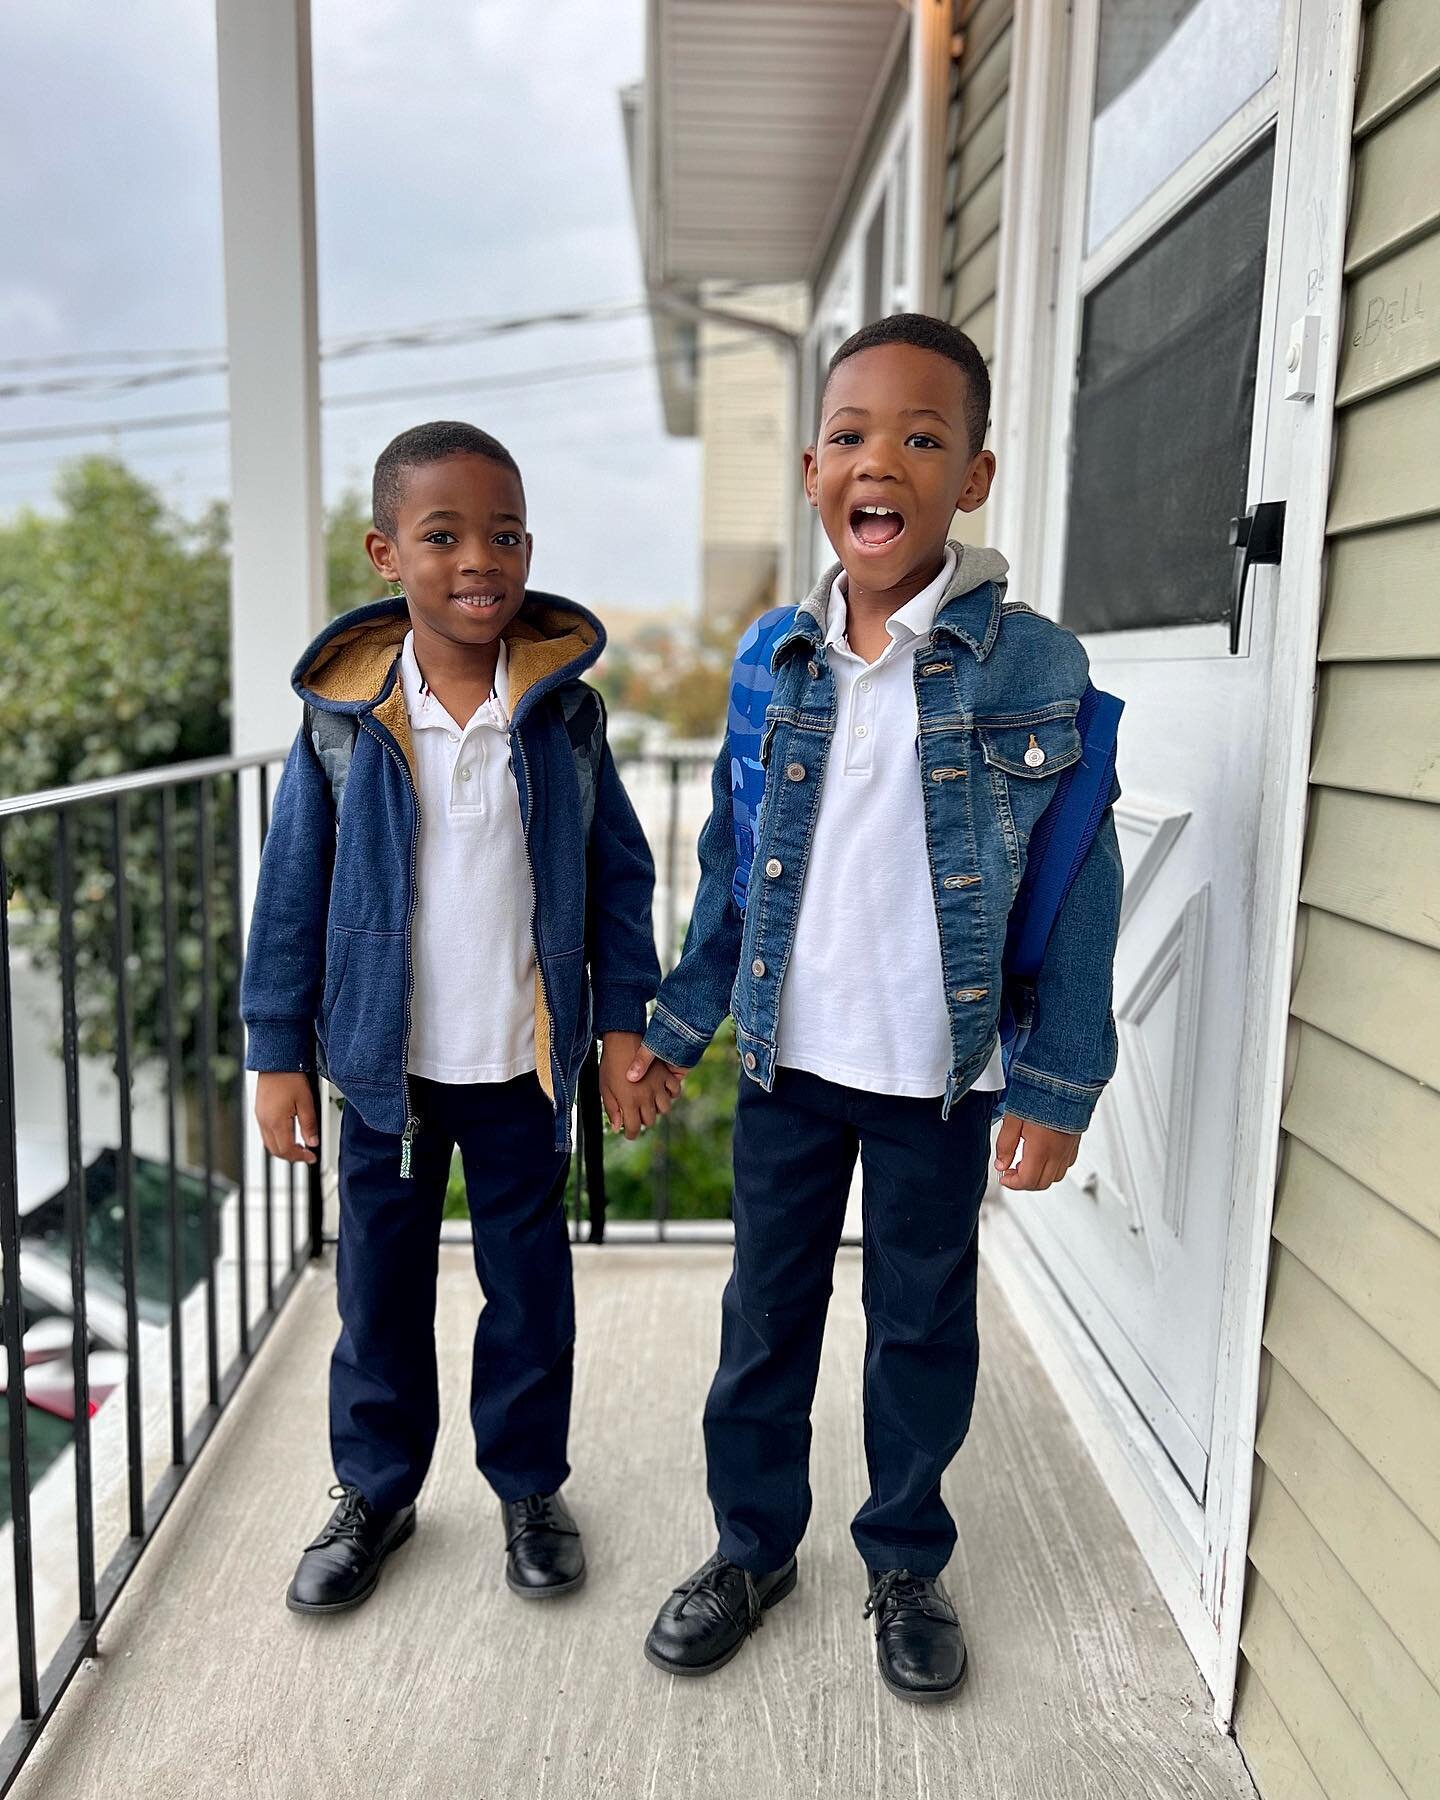 It&rsquo;s the #firstdayofschool for @thetideboyz 🏫 They&rsquo;re just as excited to go back to school as we are to have a little peace and quiet in the house ☺️

Jaden will be entering 2nd grade and Jonathan will be entering 1st grade. I hope they 